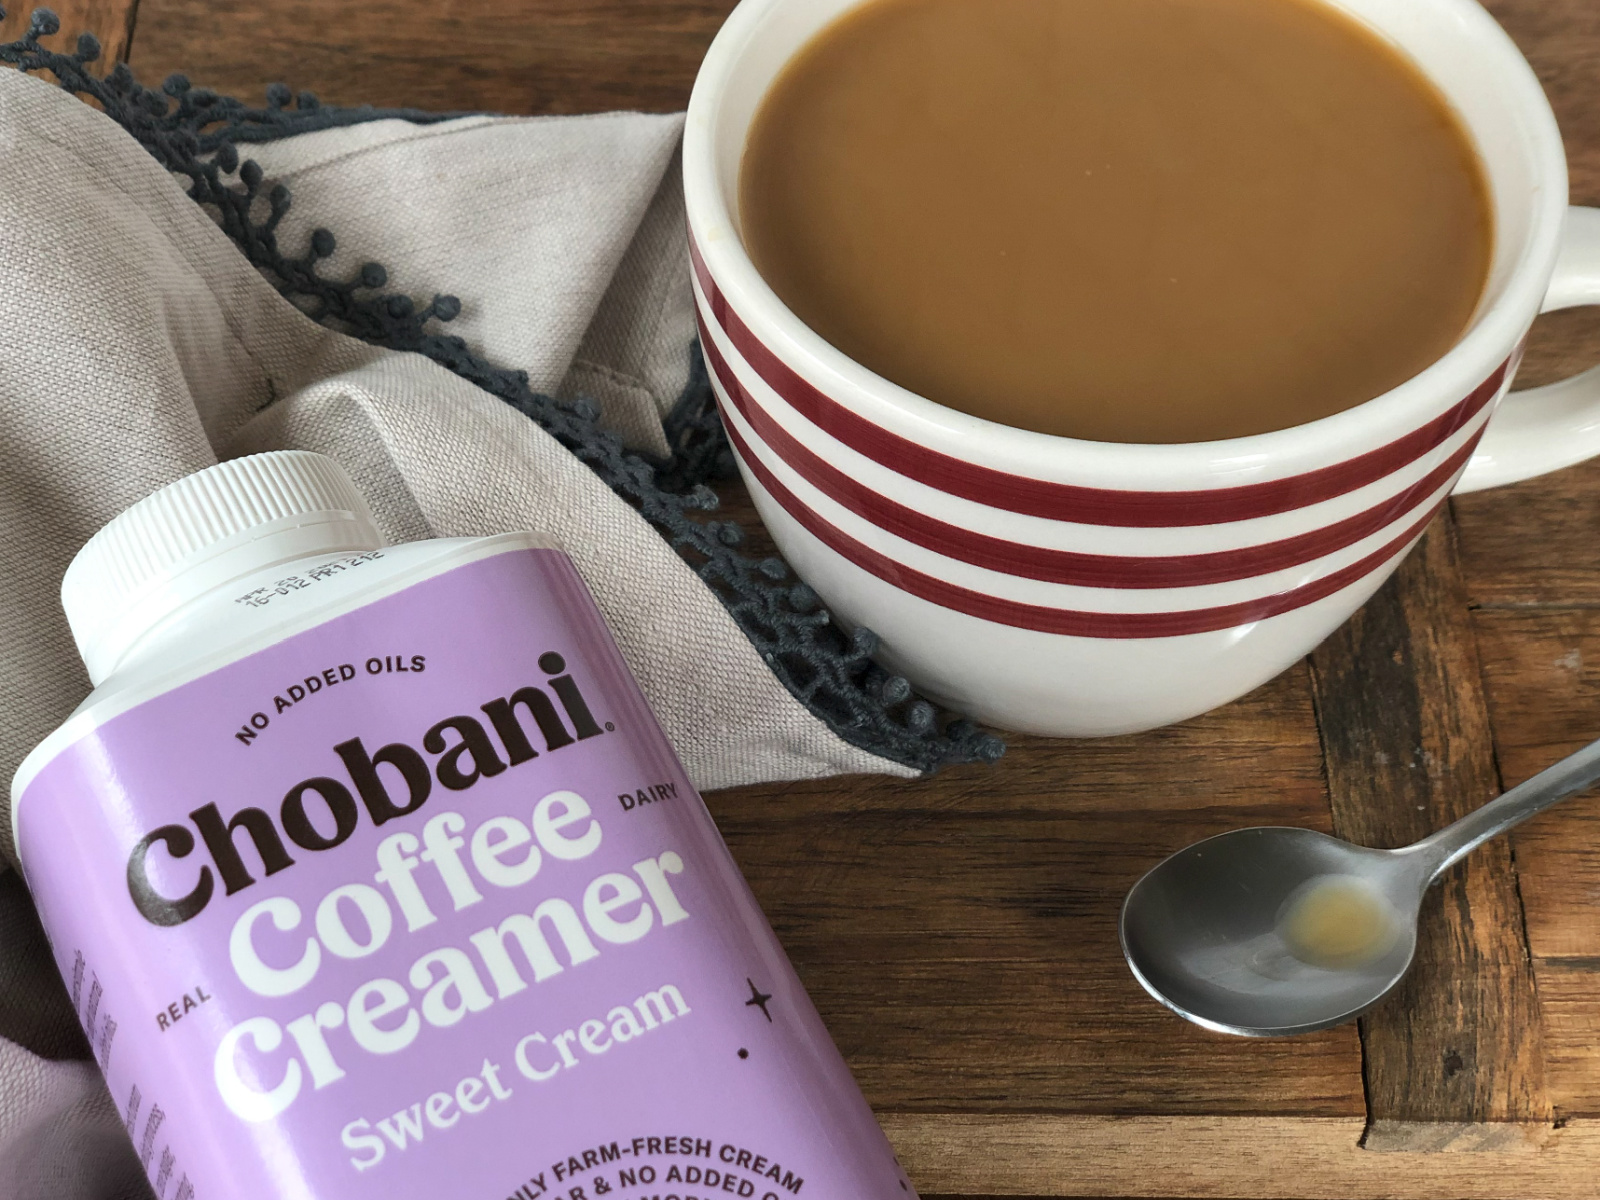 Get Chobani Coffee Creamer As Low As $2.49 At Kroger With The New Coupon